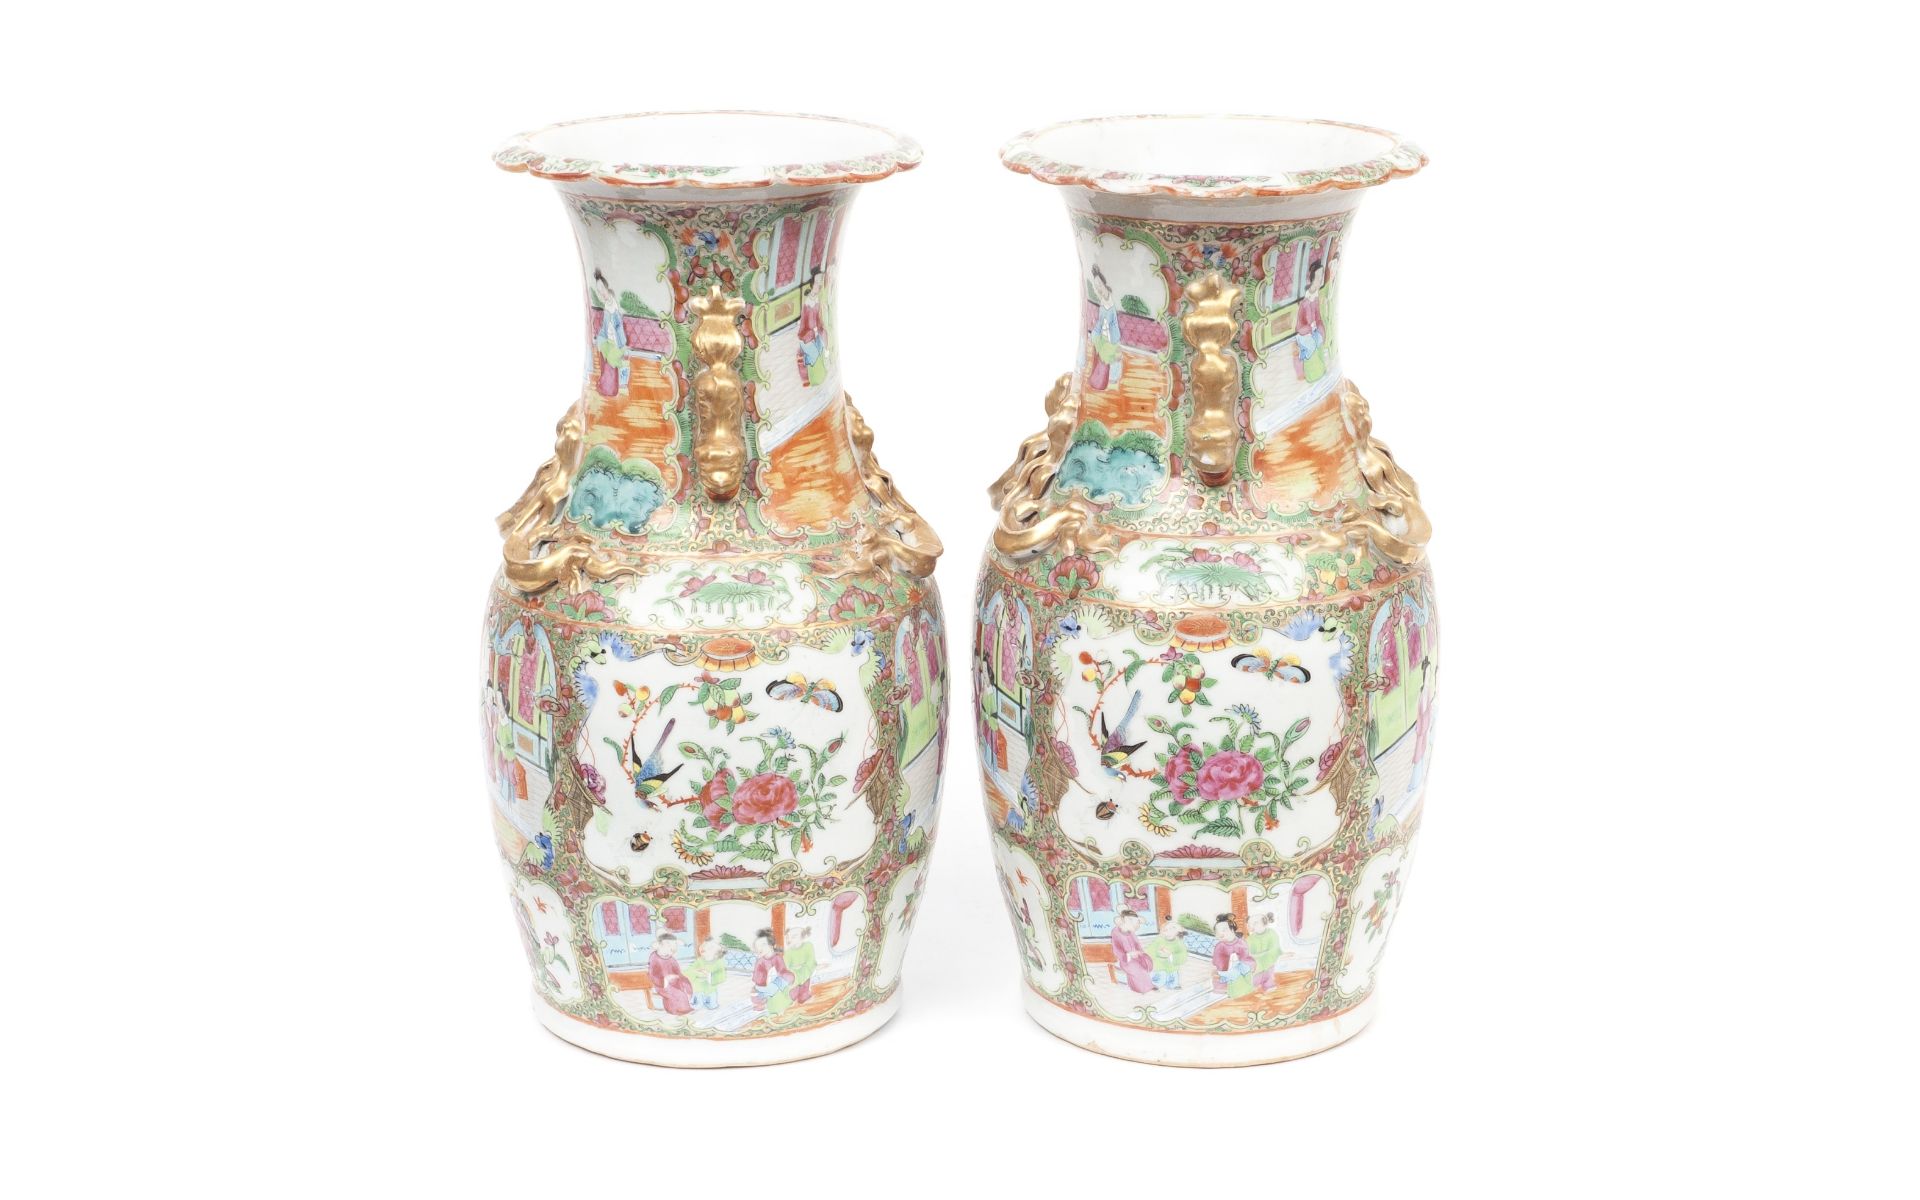 A PAIR OF LATE 19TH CENTURY CHINESE CANTON PORCELAIN VASES - Image 3 of 3